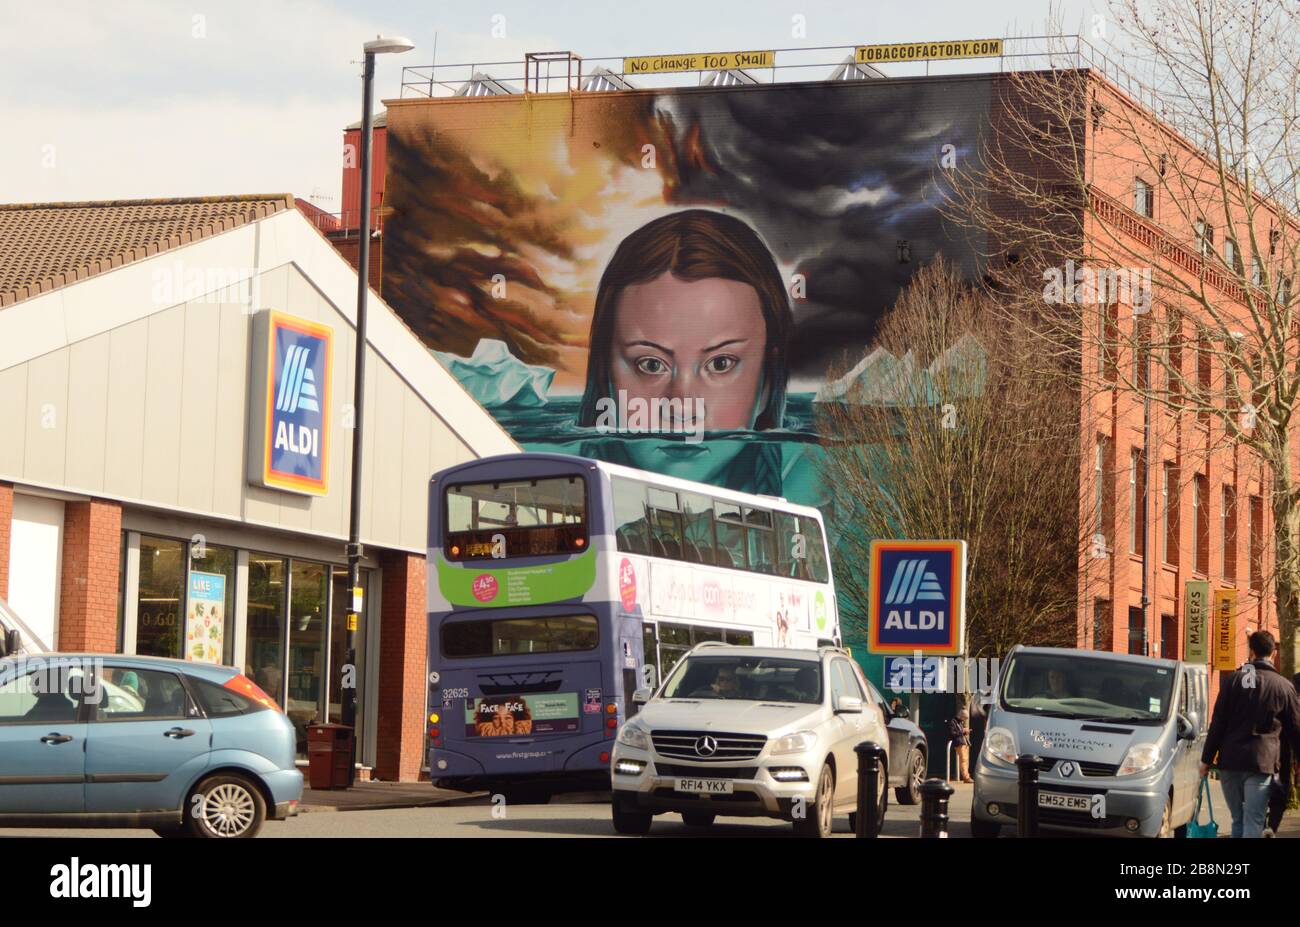 Greta Thunberg large-scale art mural painted on the former Wills tobacco factory in Bristol by local artist Jody Thomas Stock Photo